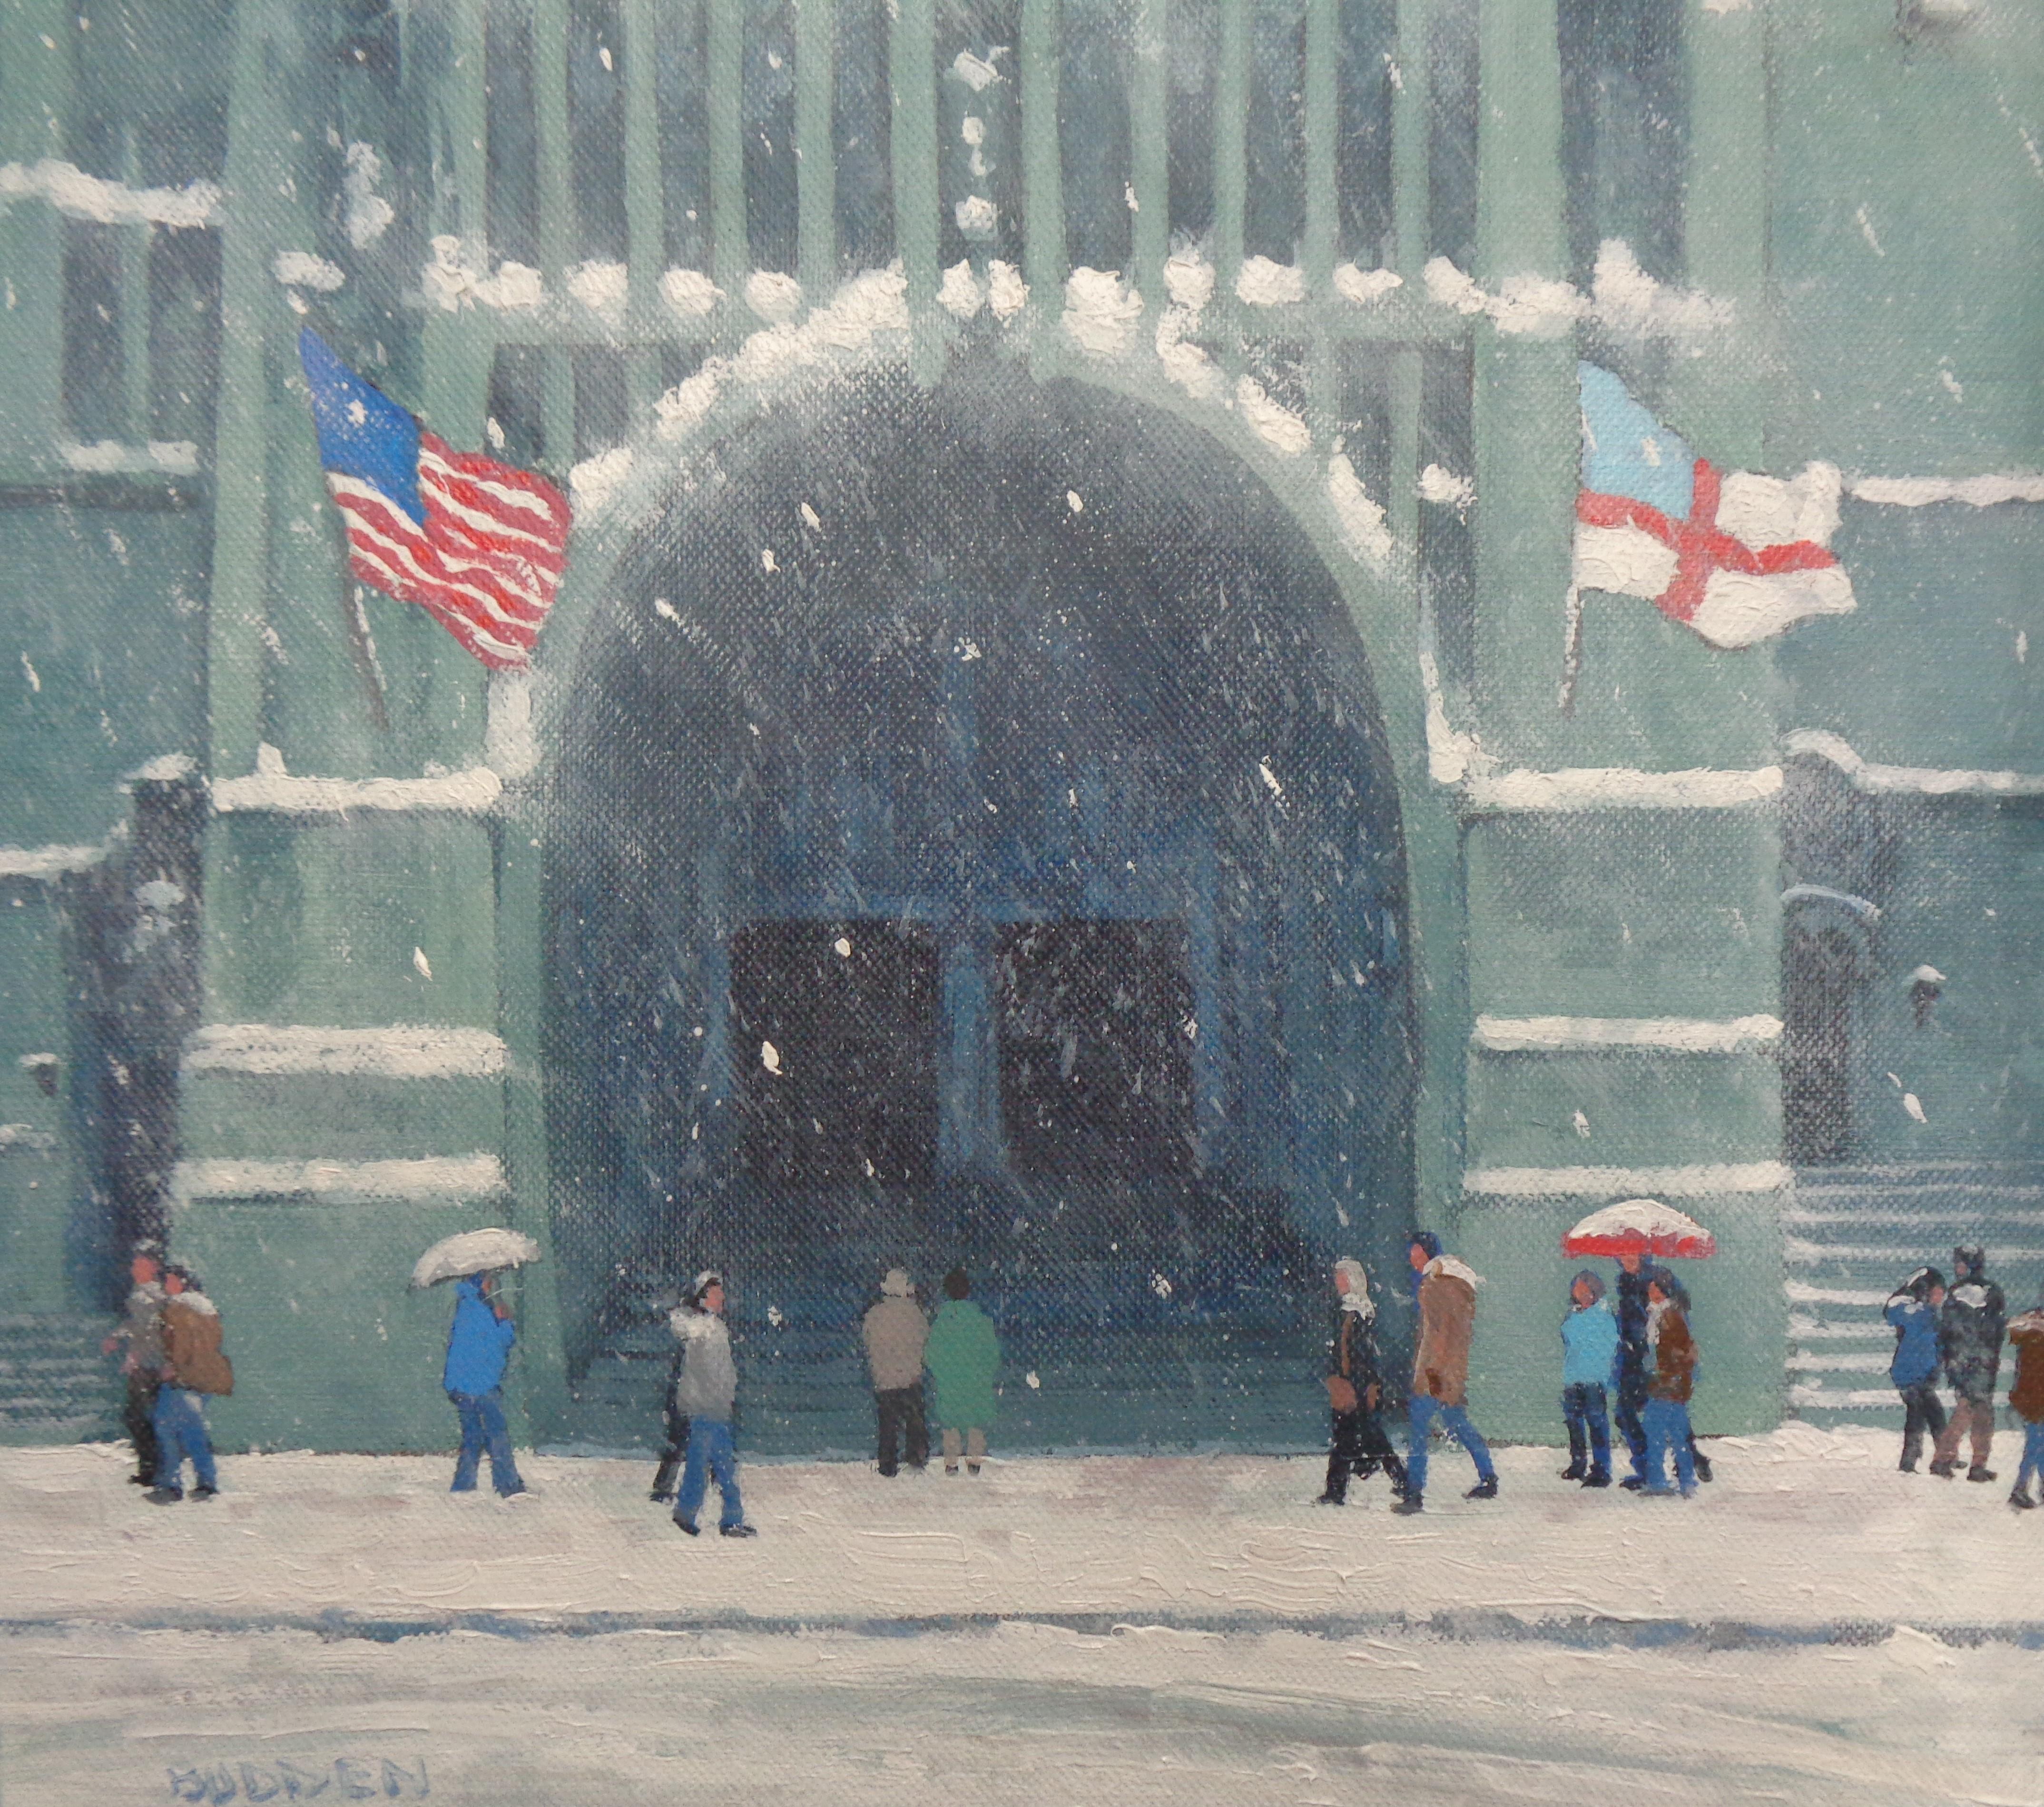 5th Avenue Winter, St Thomas Church  is an oil painting  on canvas panel by award winning contemporary artist Michael Budden. 5th Avenue is obviously a favorite spot to hit while visiting NYC and has many iconic images for sure.  I enjoy playing